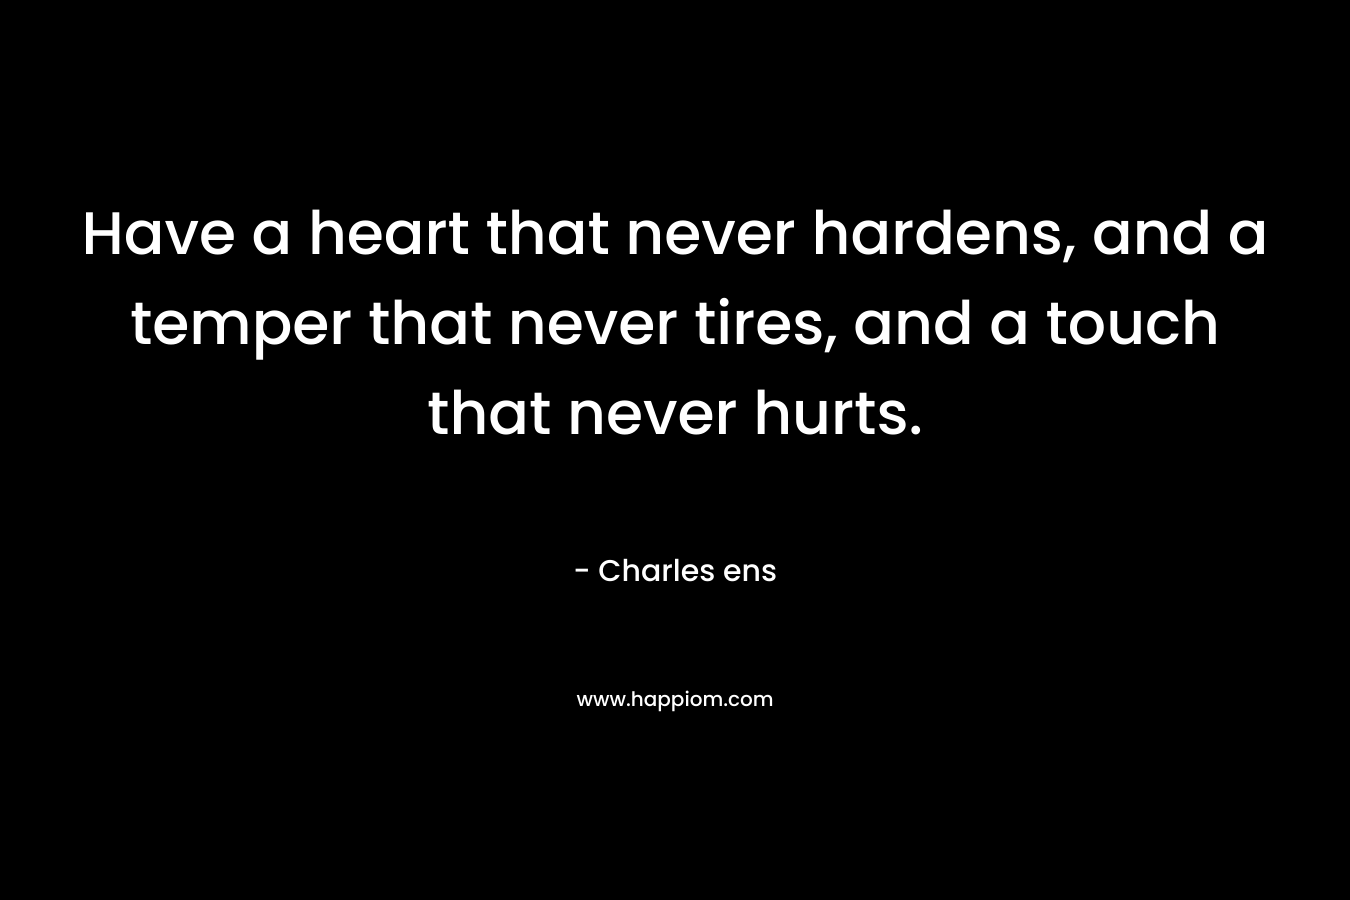 Have a heart that never hardens, and a temper that never tires, and a touch that never hurts. – Charles ens